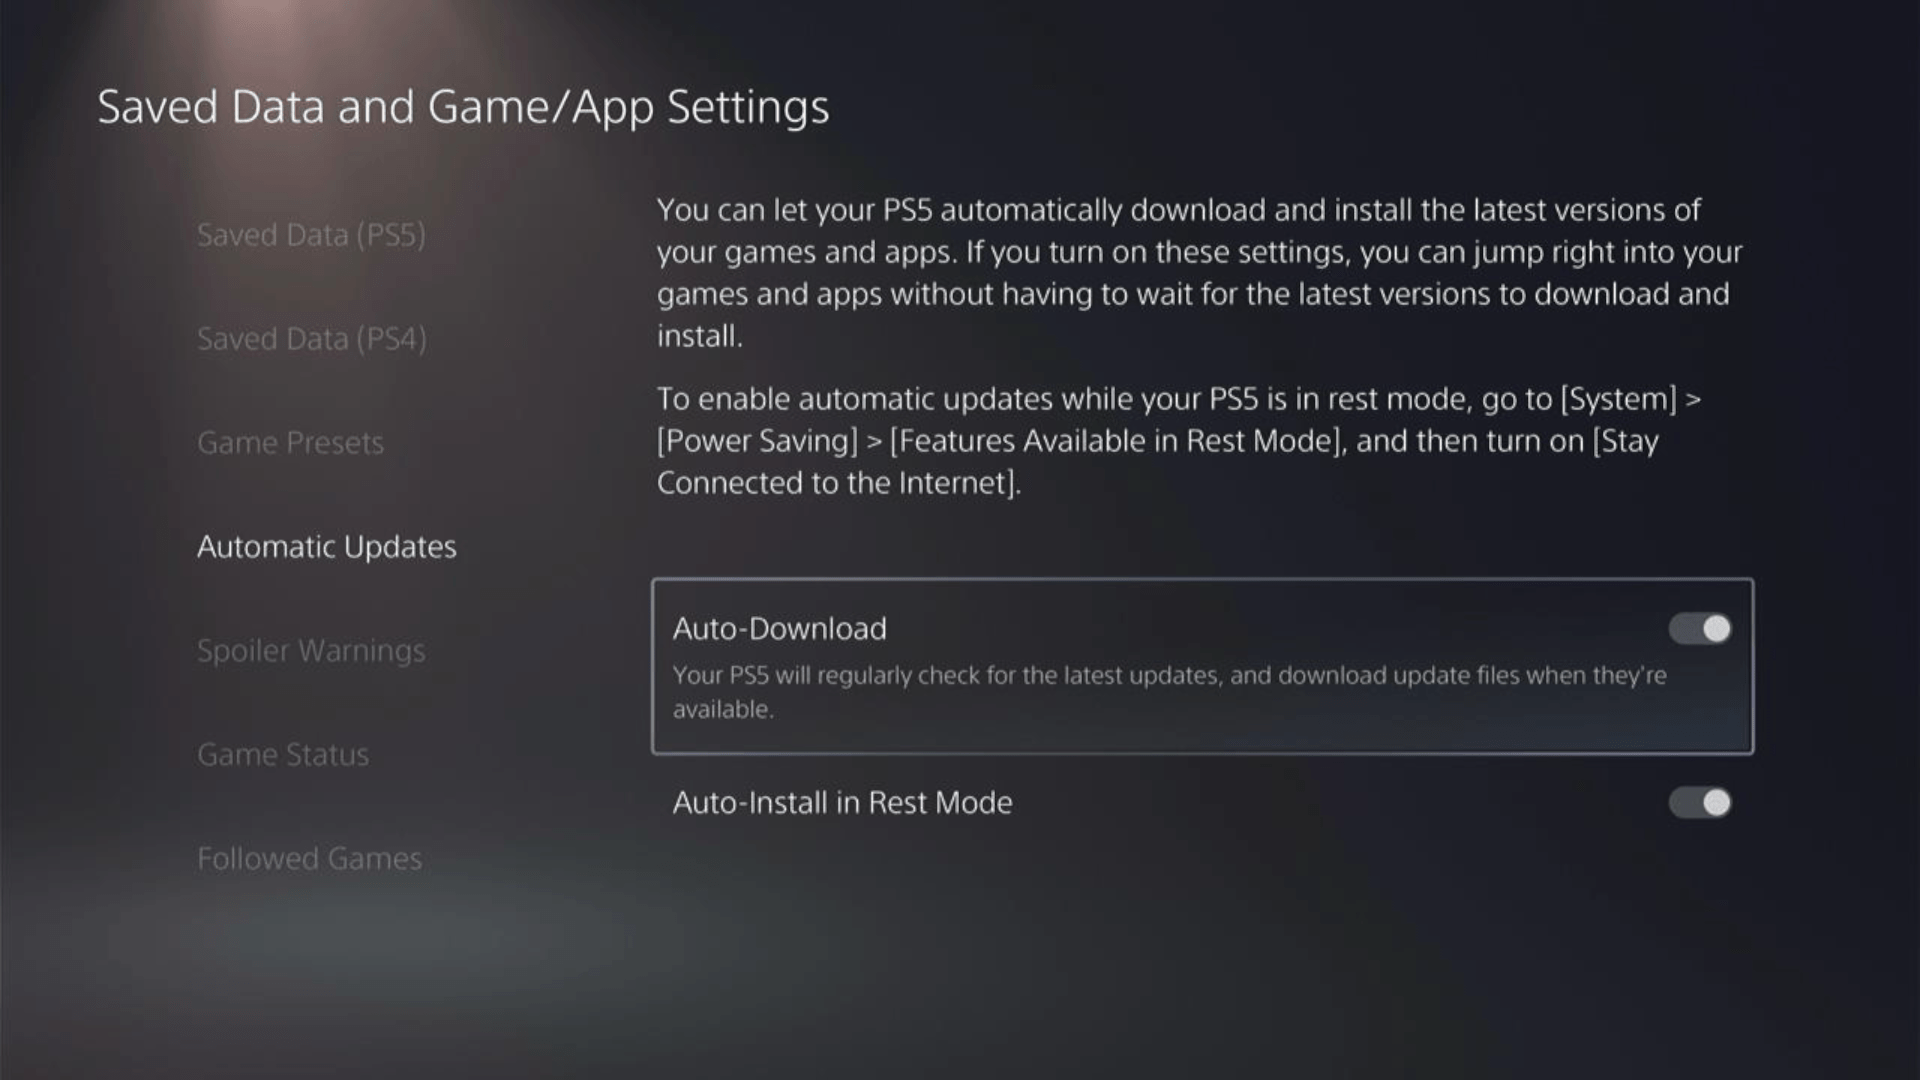 In the Saved Data and Game/App Settings window, select Automatic Updates from the left sidebar to enable automatic game updates to avoid lagging